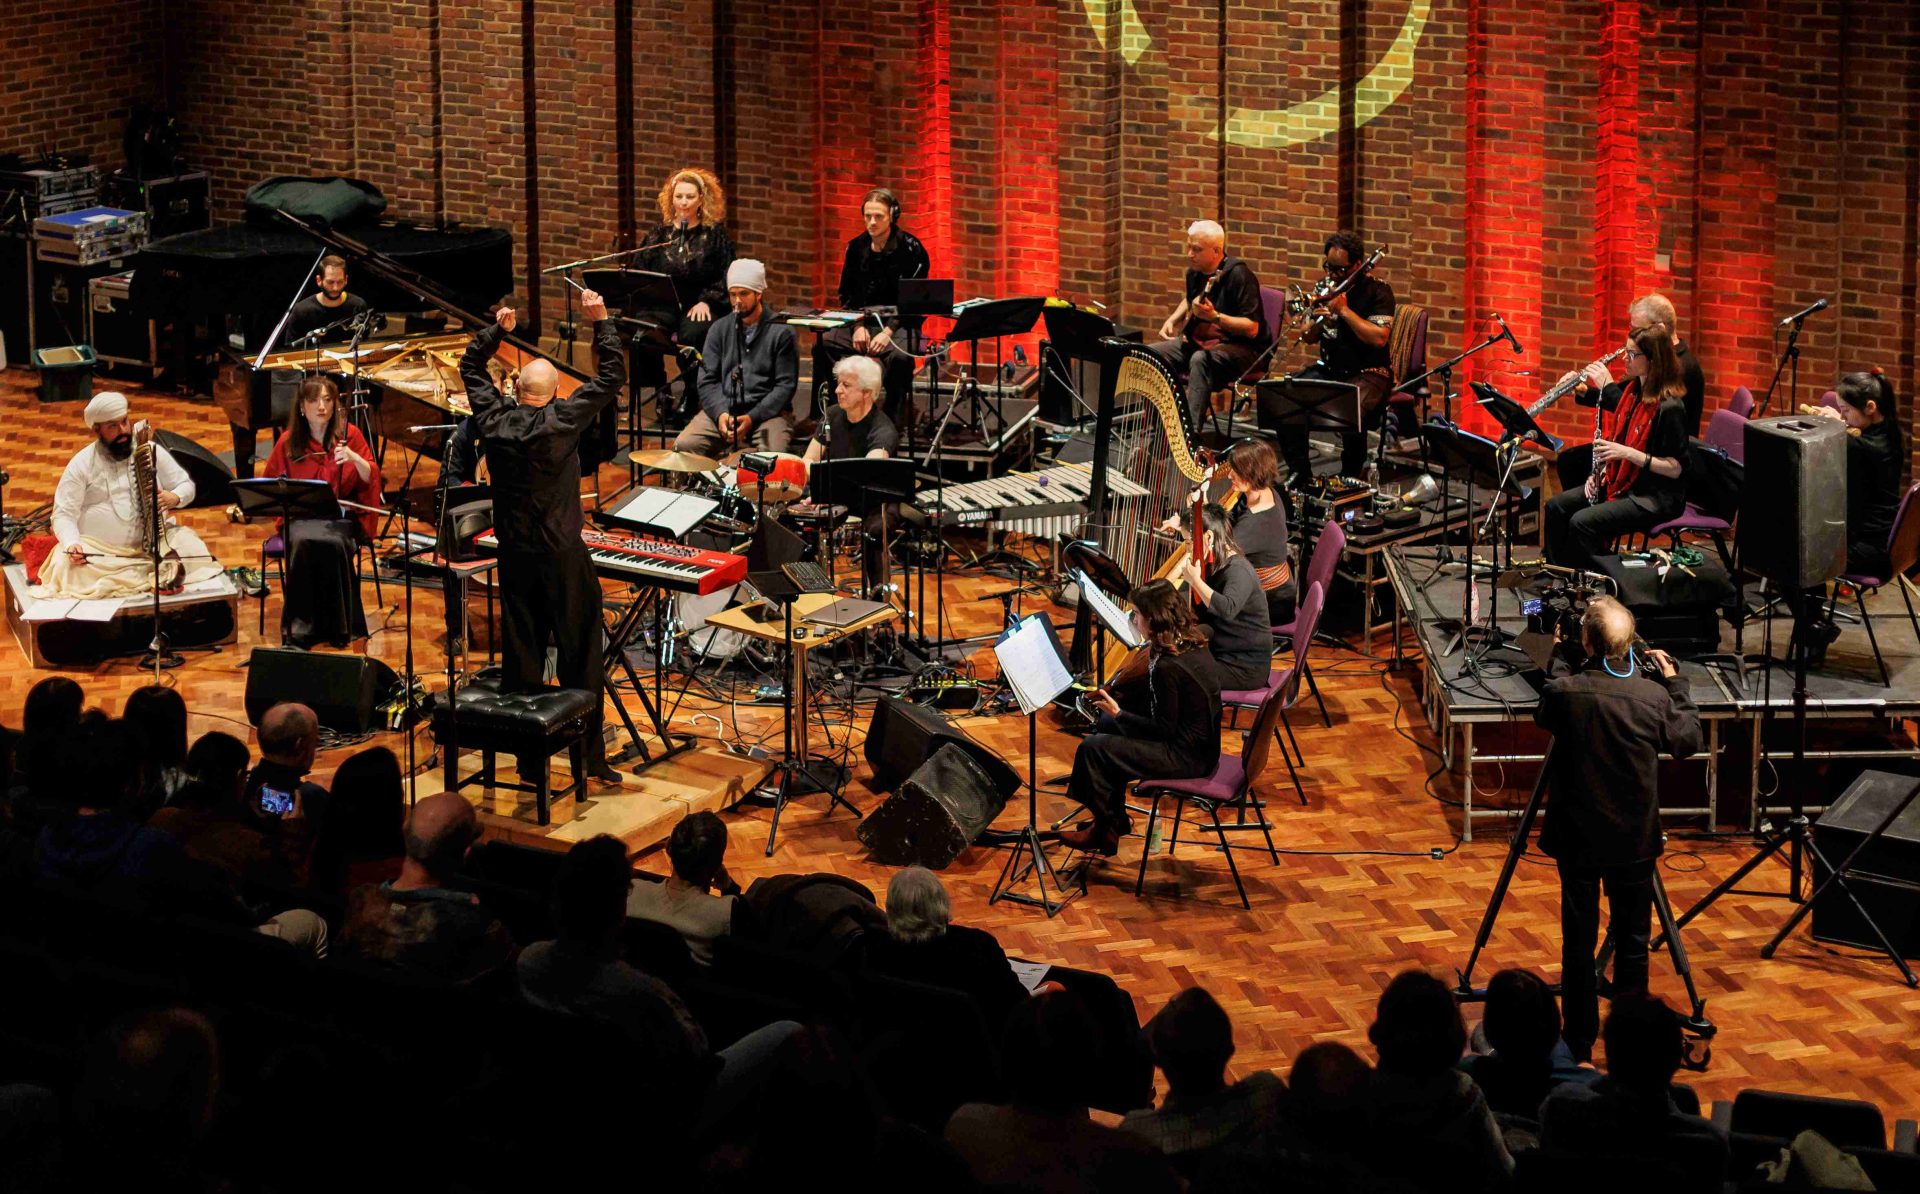 The Third Orchestra